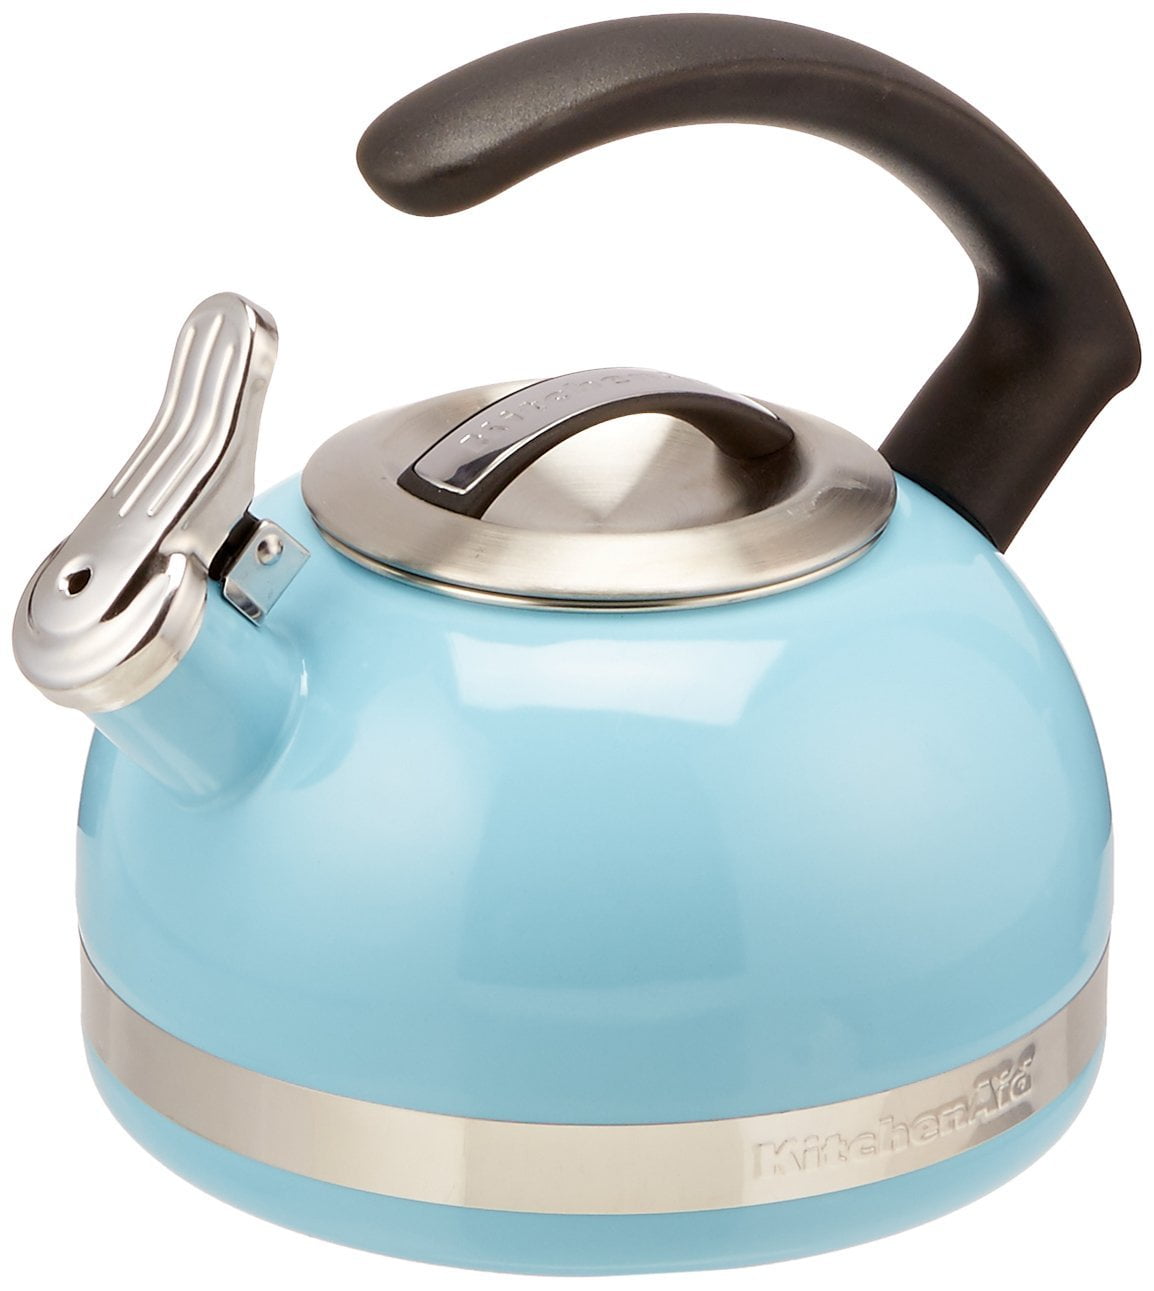 Cameo Blue KitchenAid 2-Quart Stovetop Tea Kettle with Stainless Steel Handle 